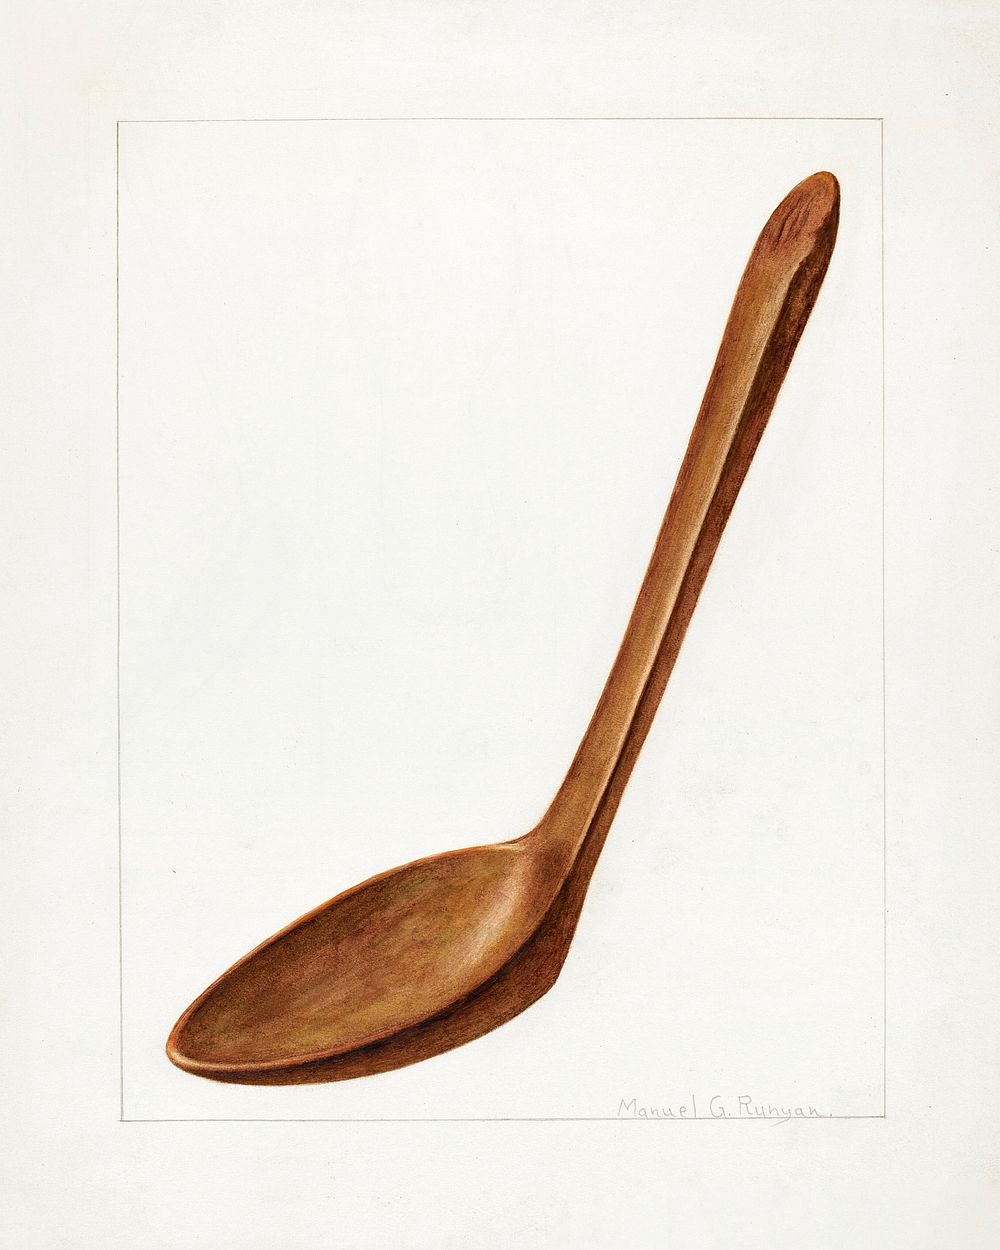 Wooden Spatula (ca.1938) by Manuel G. Runyan. Original from The National Gallery of Art. Digitally enhanced by rawpixel.